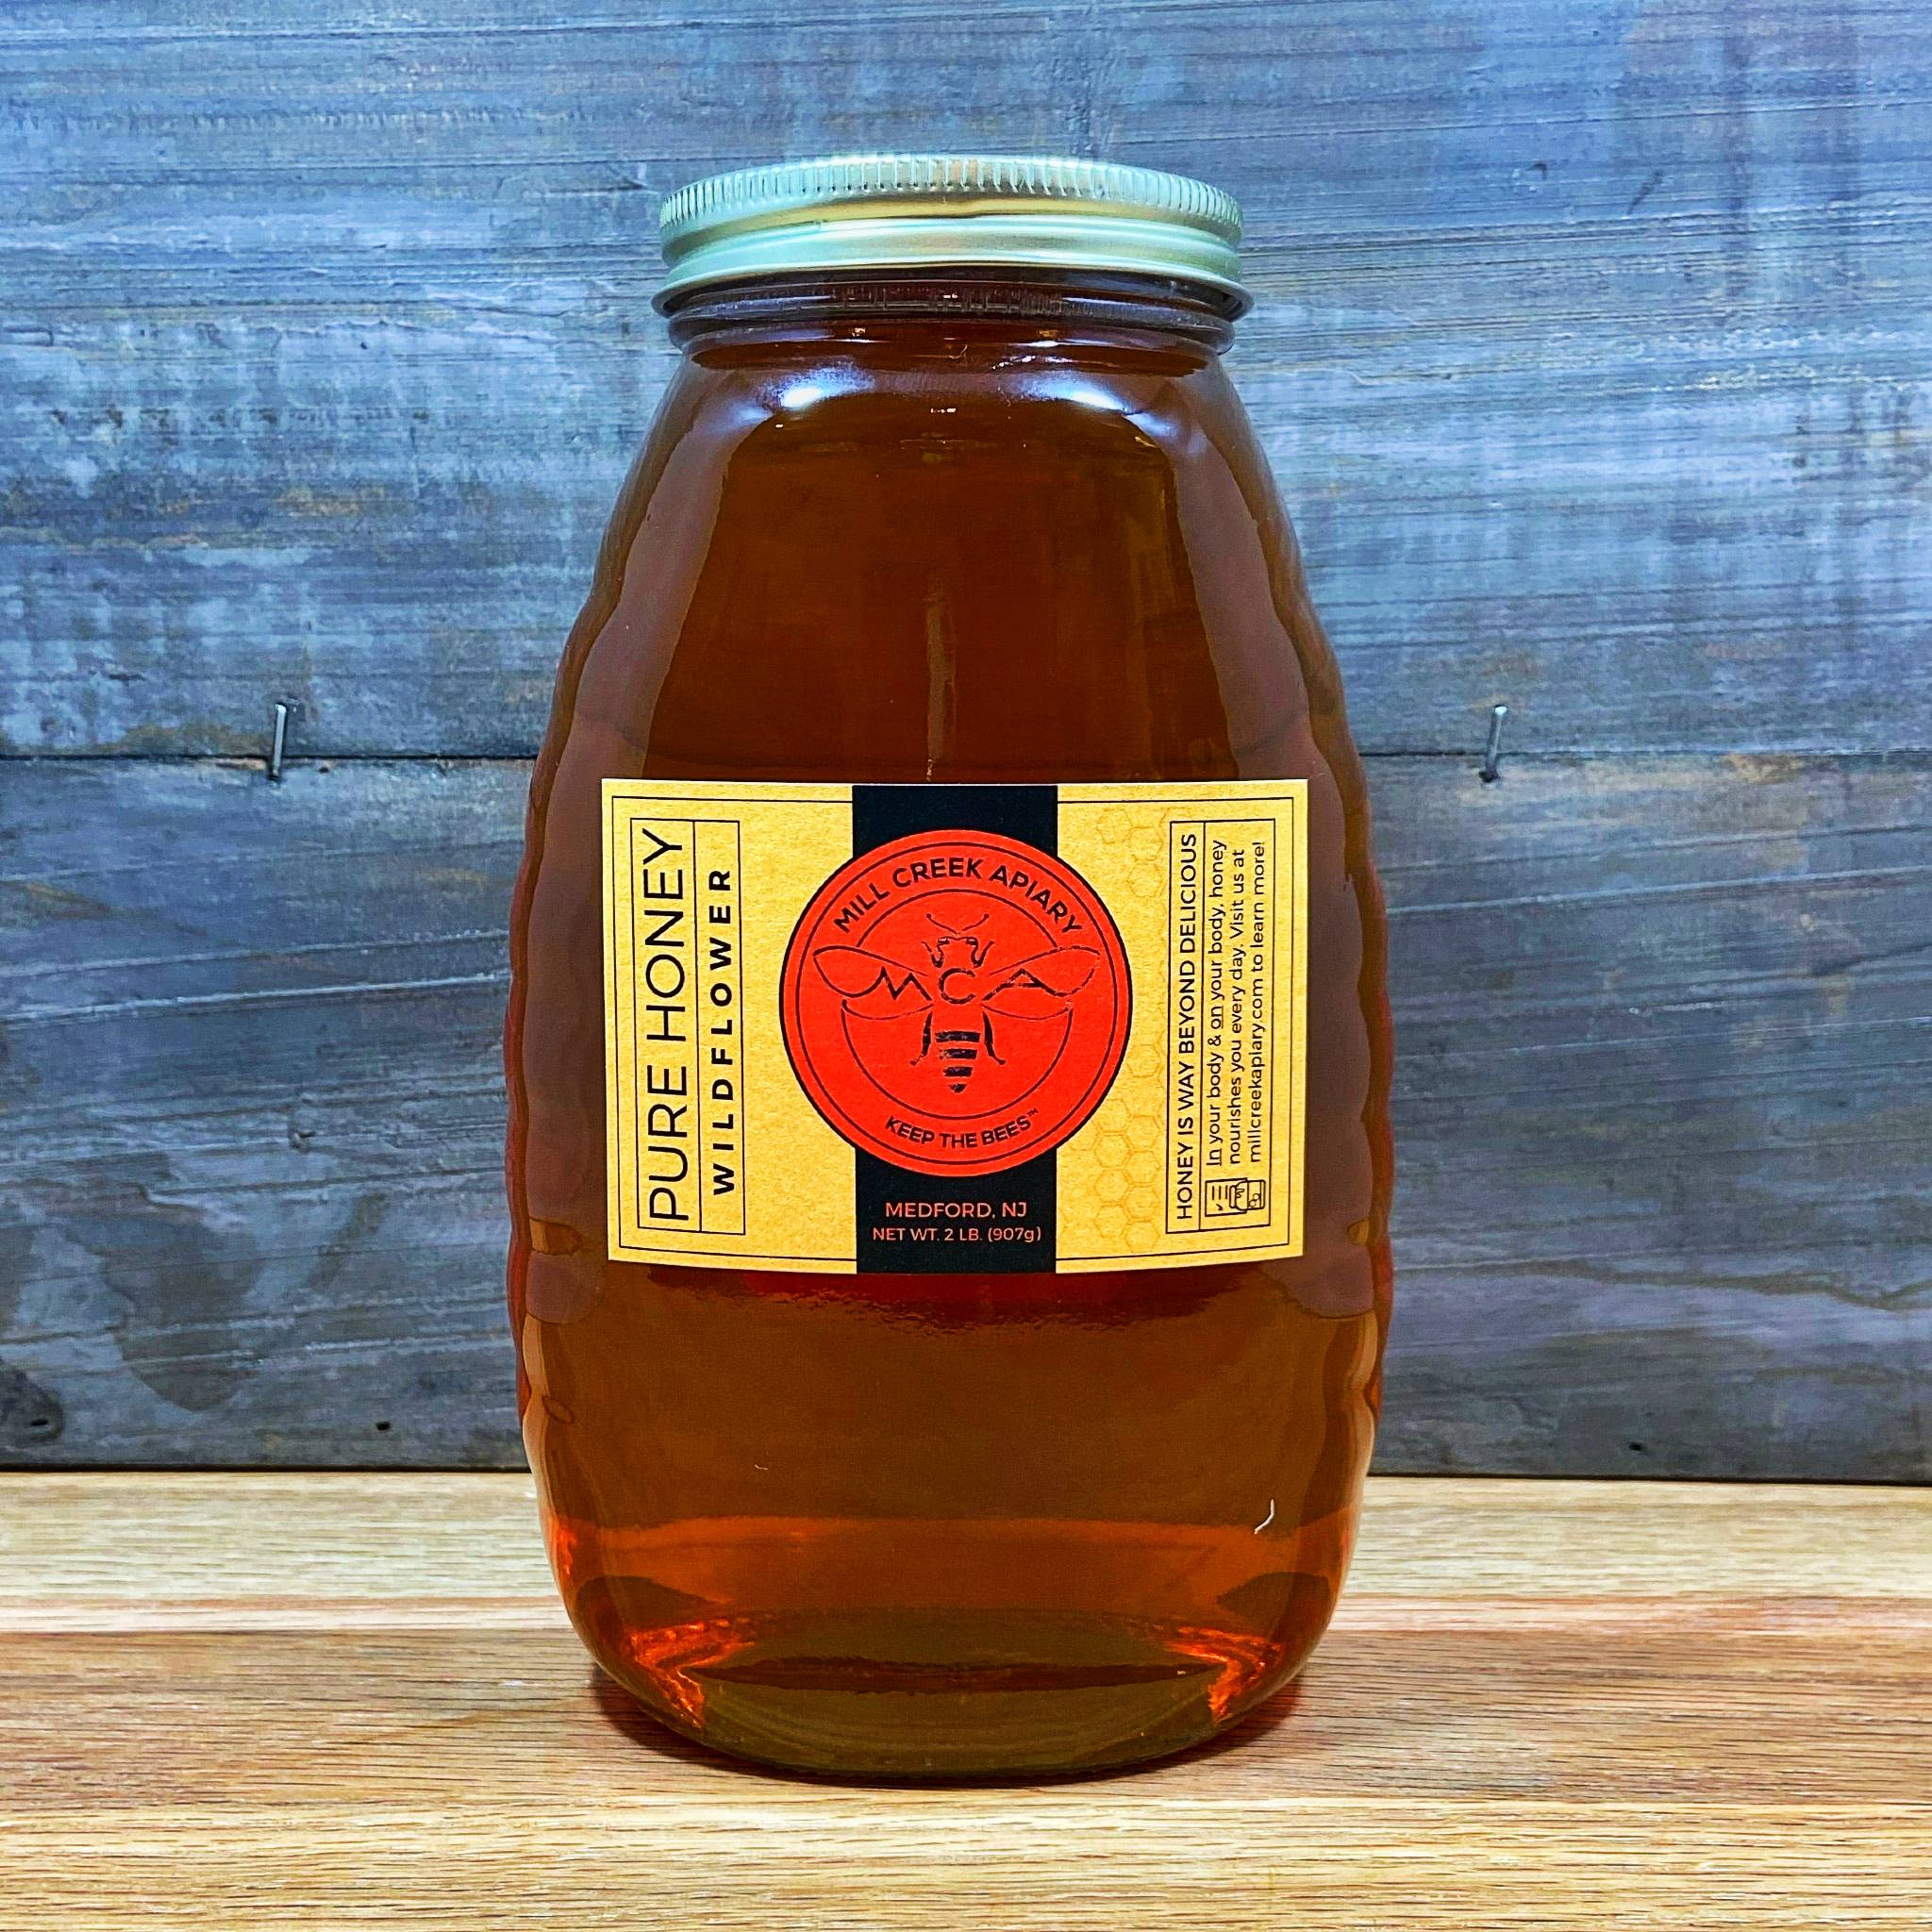 Mill Creek Apiary's wildflower honey is our most popular variety